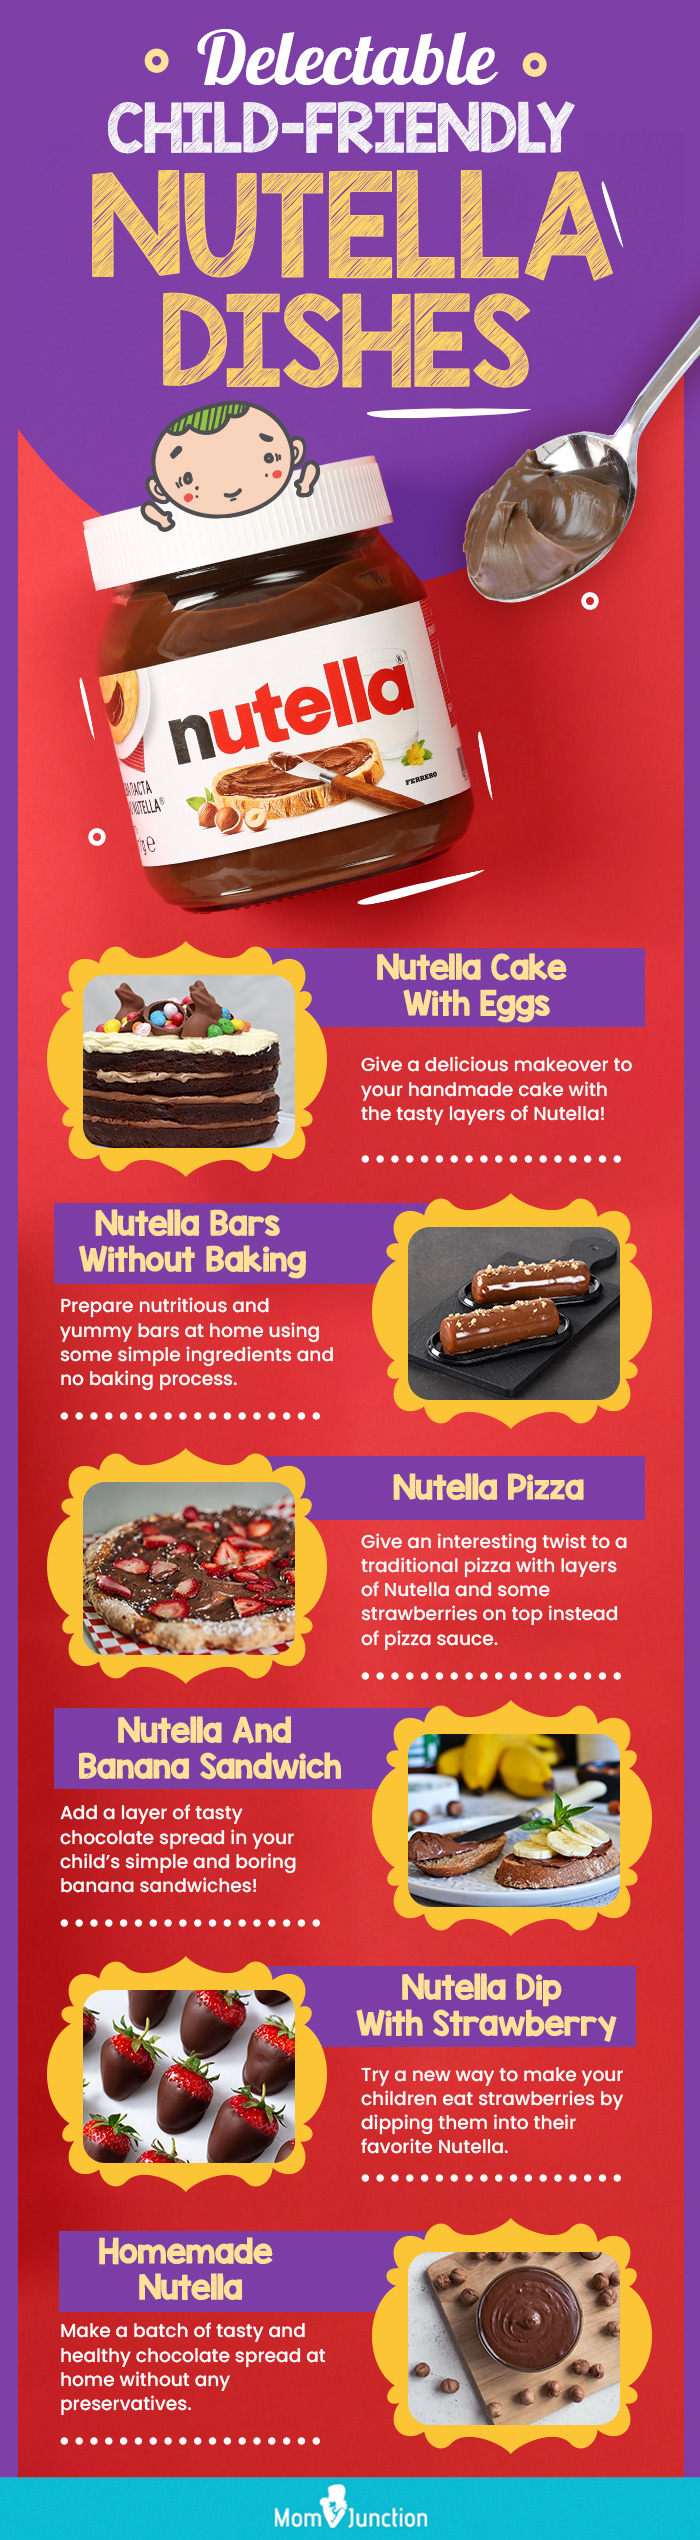 delectable child friendly nutella dishes (infographic)